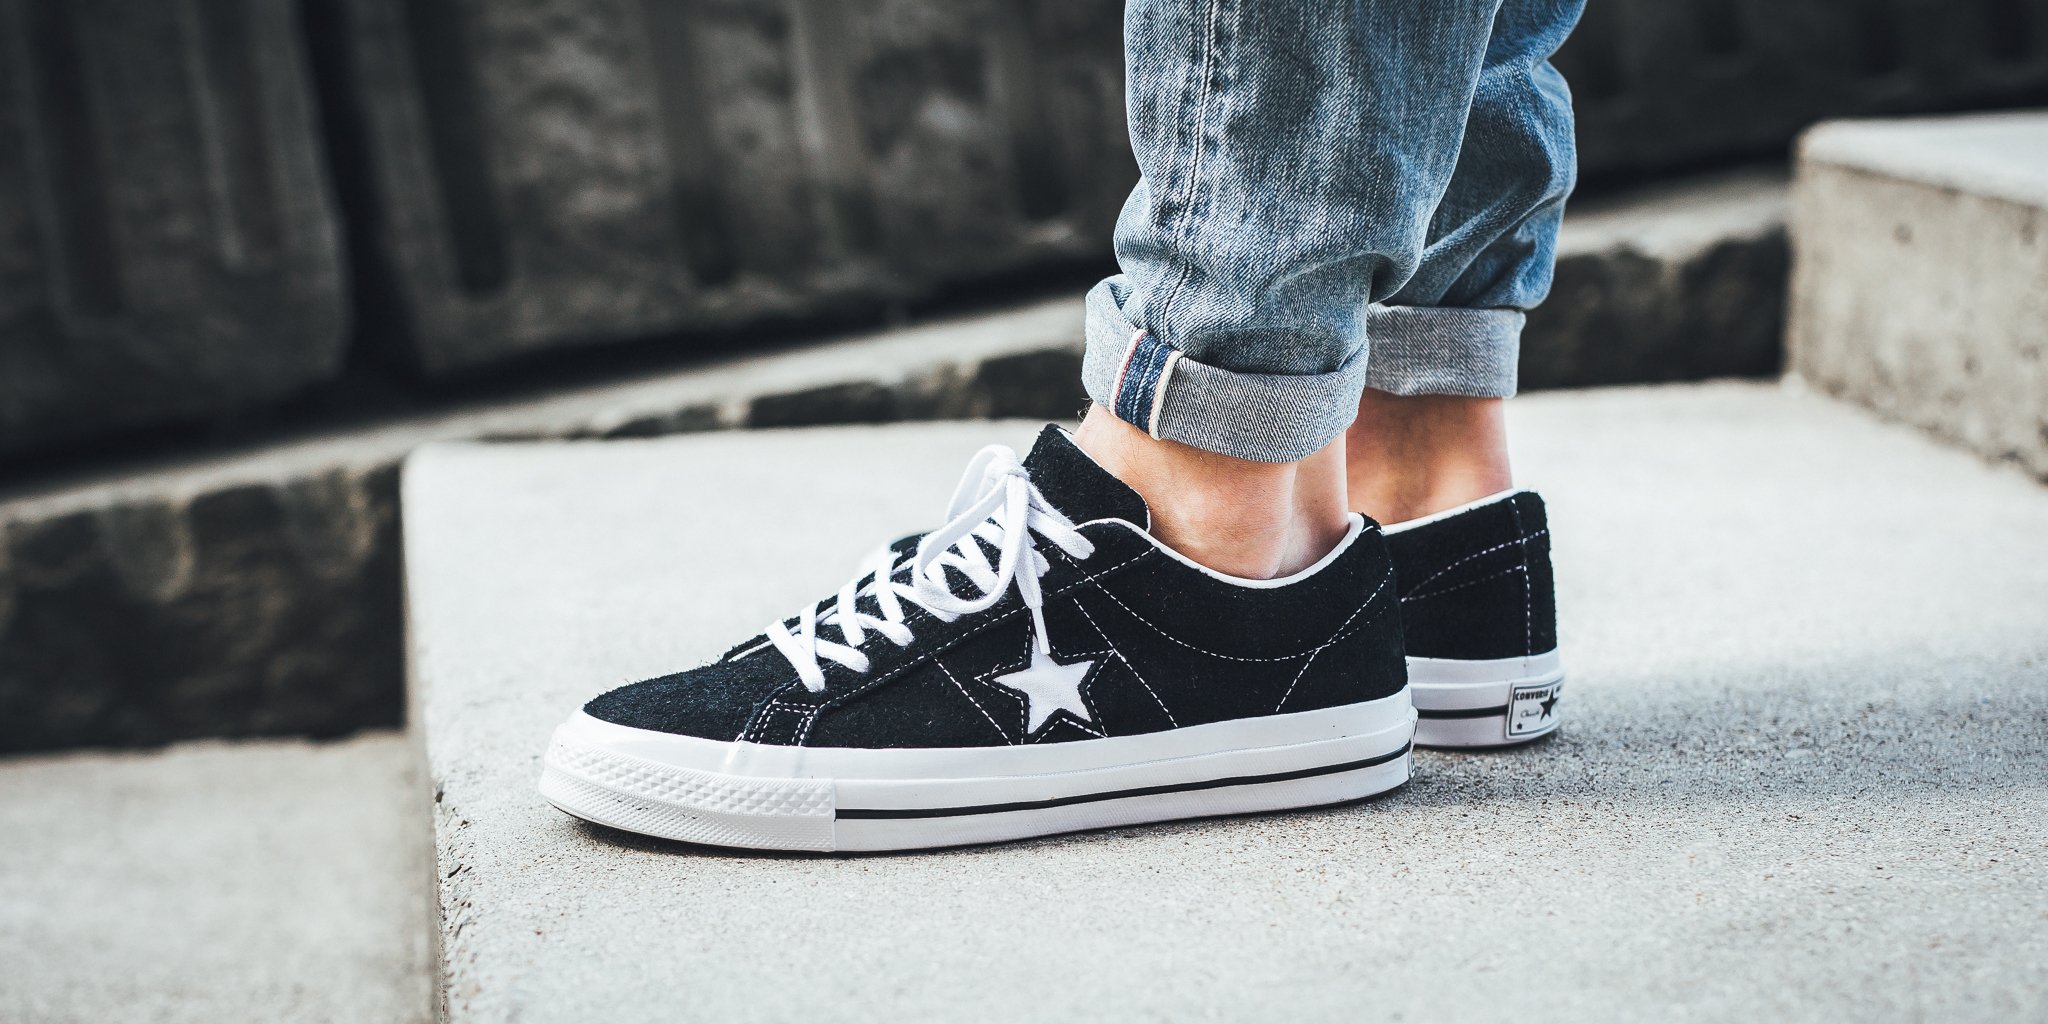 bijtend Bekwaam Scheermes Titolo on Twitter: "Don't hesitate to check our #SALE! 😎🕐🏁 Converse One  Star Premium Suede Low Top - Black/White-White shop NOW 👉🏻  https://t.co/yLwXPSGCVb #sale #sales #sneakers #nike #adidas #puma #reebok  #asics #vans #